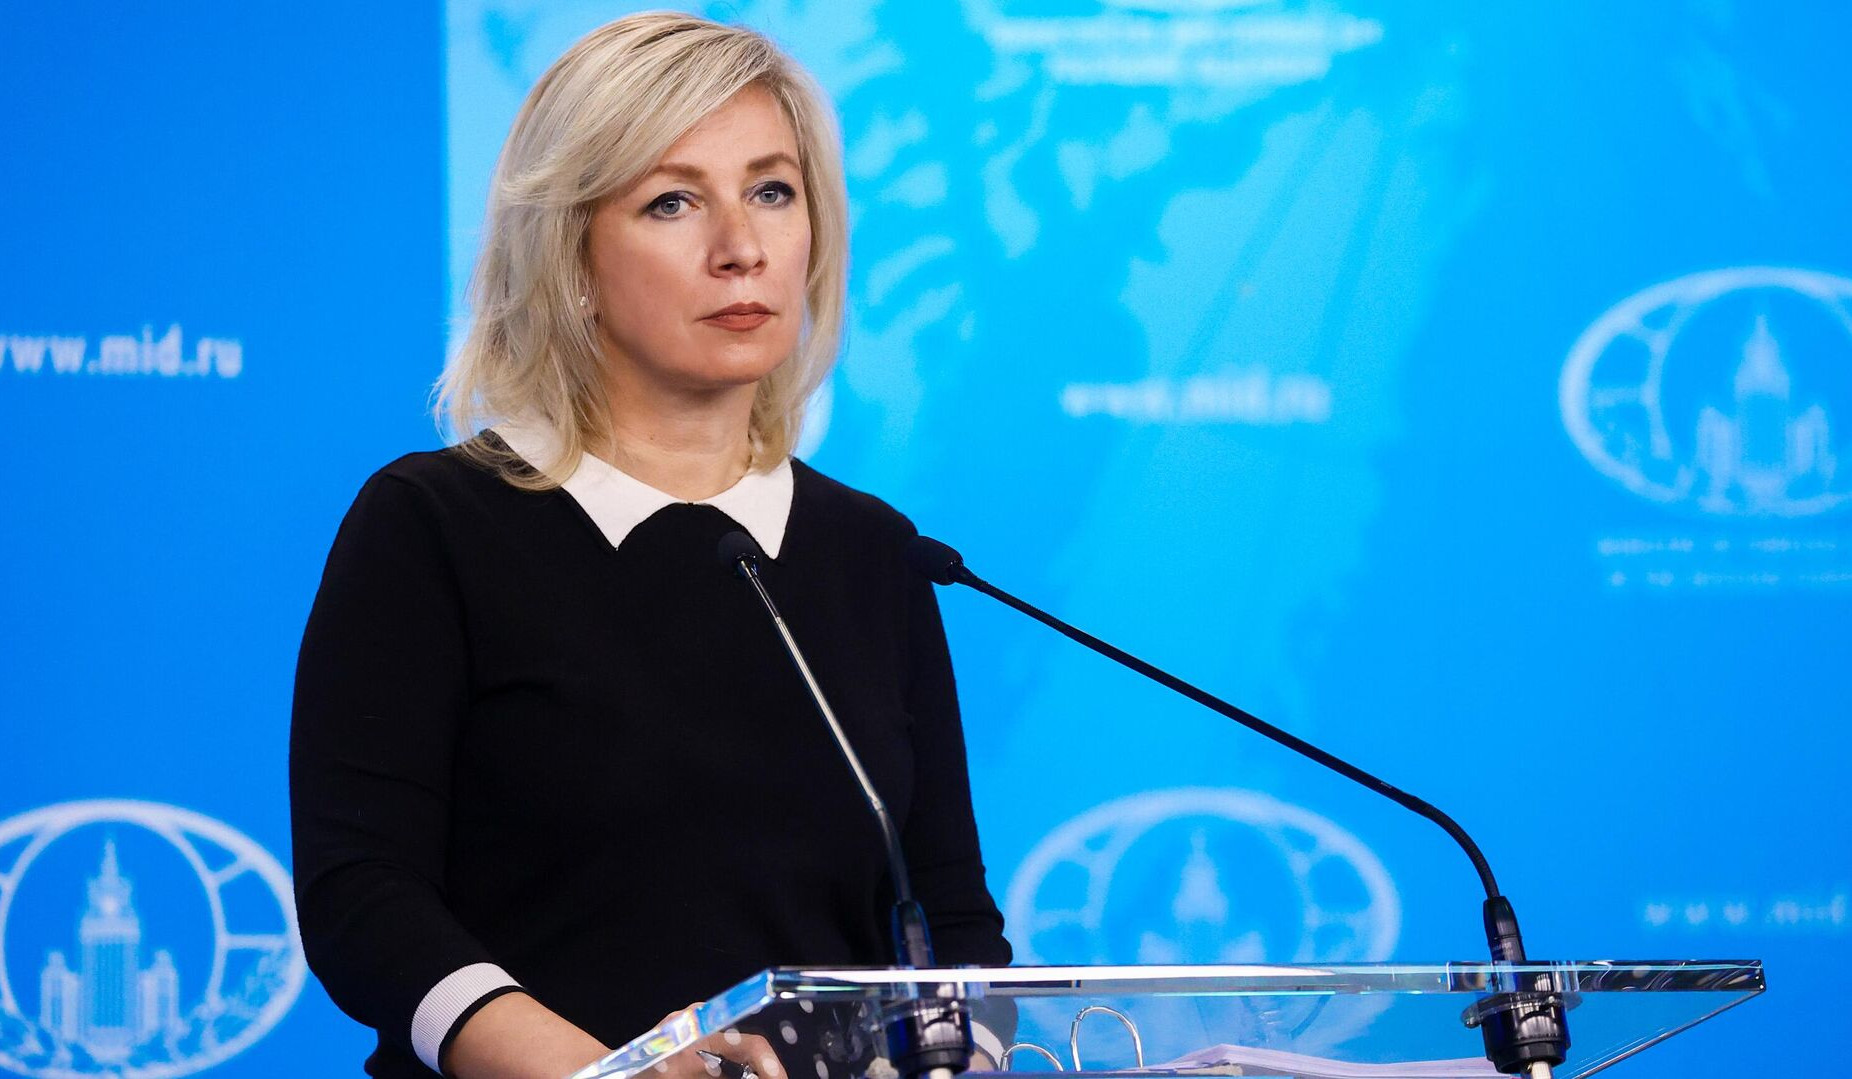 EU calling for dialogue and talks between Moscow and Kiev was never accompanied with any real efforts, Zakharova